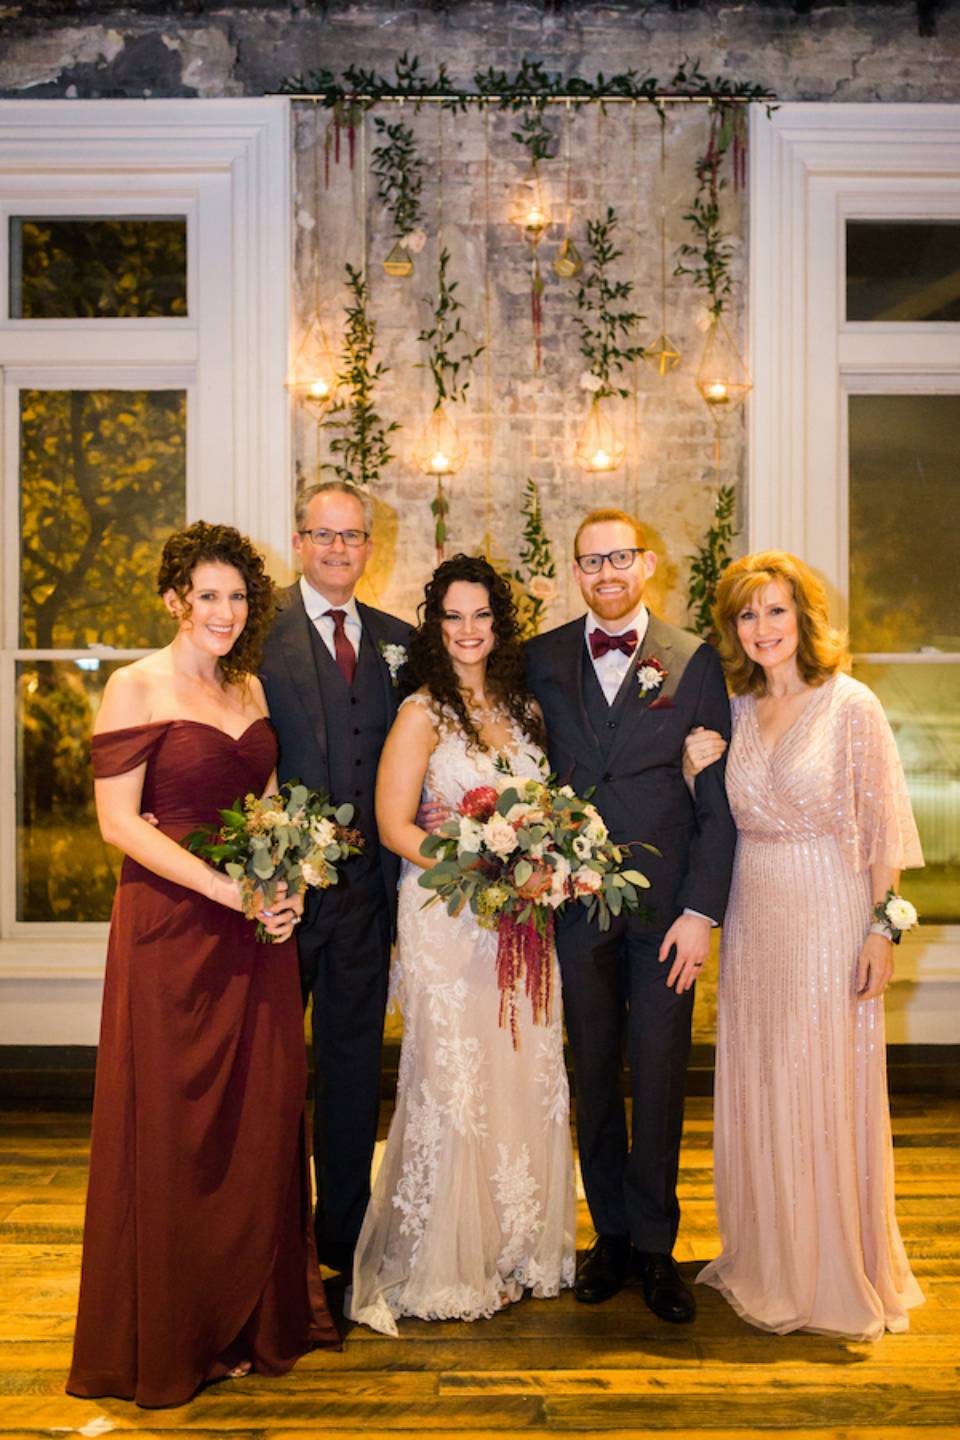 We're SO thrilled to welcome Kellie (who married our son Kurt in December 2020) to our family